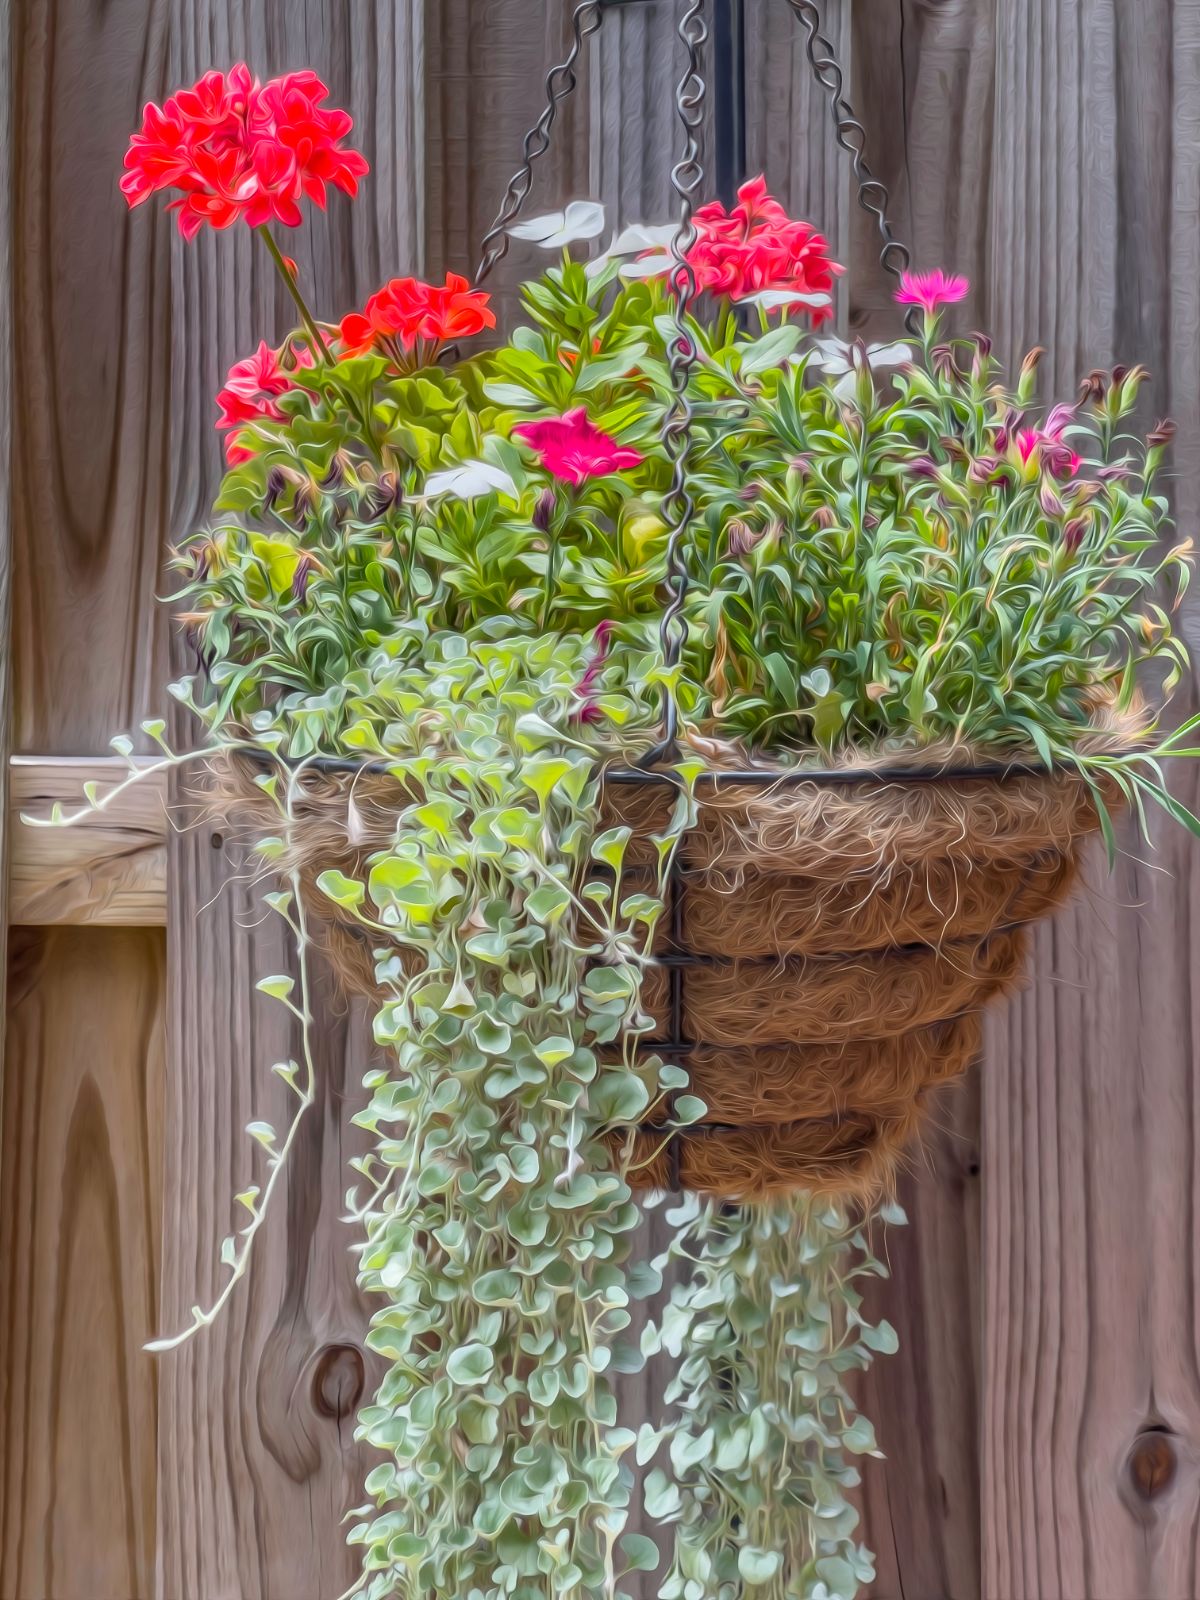 A hanging basket planted with mixed flowering and vining plants